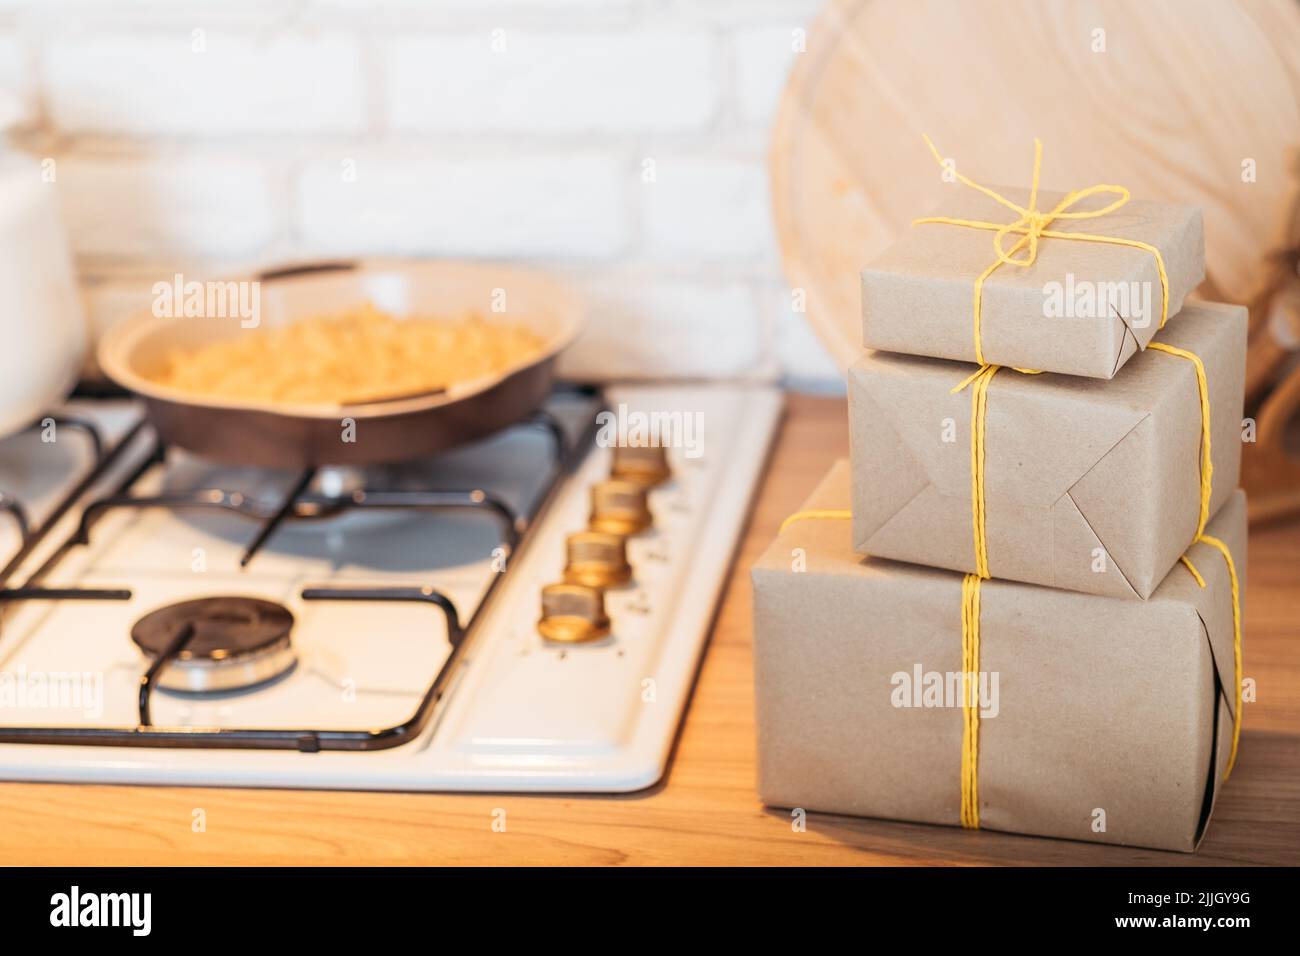 family business homemade food delivery gift boxes Stock Photo